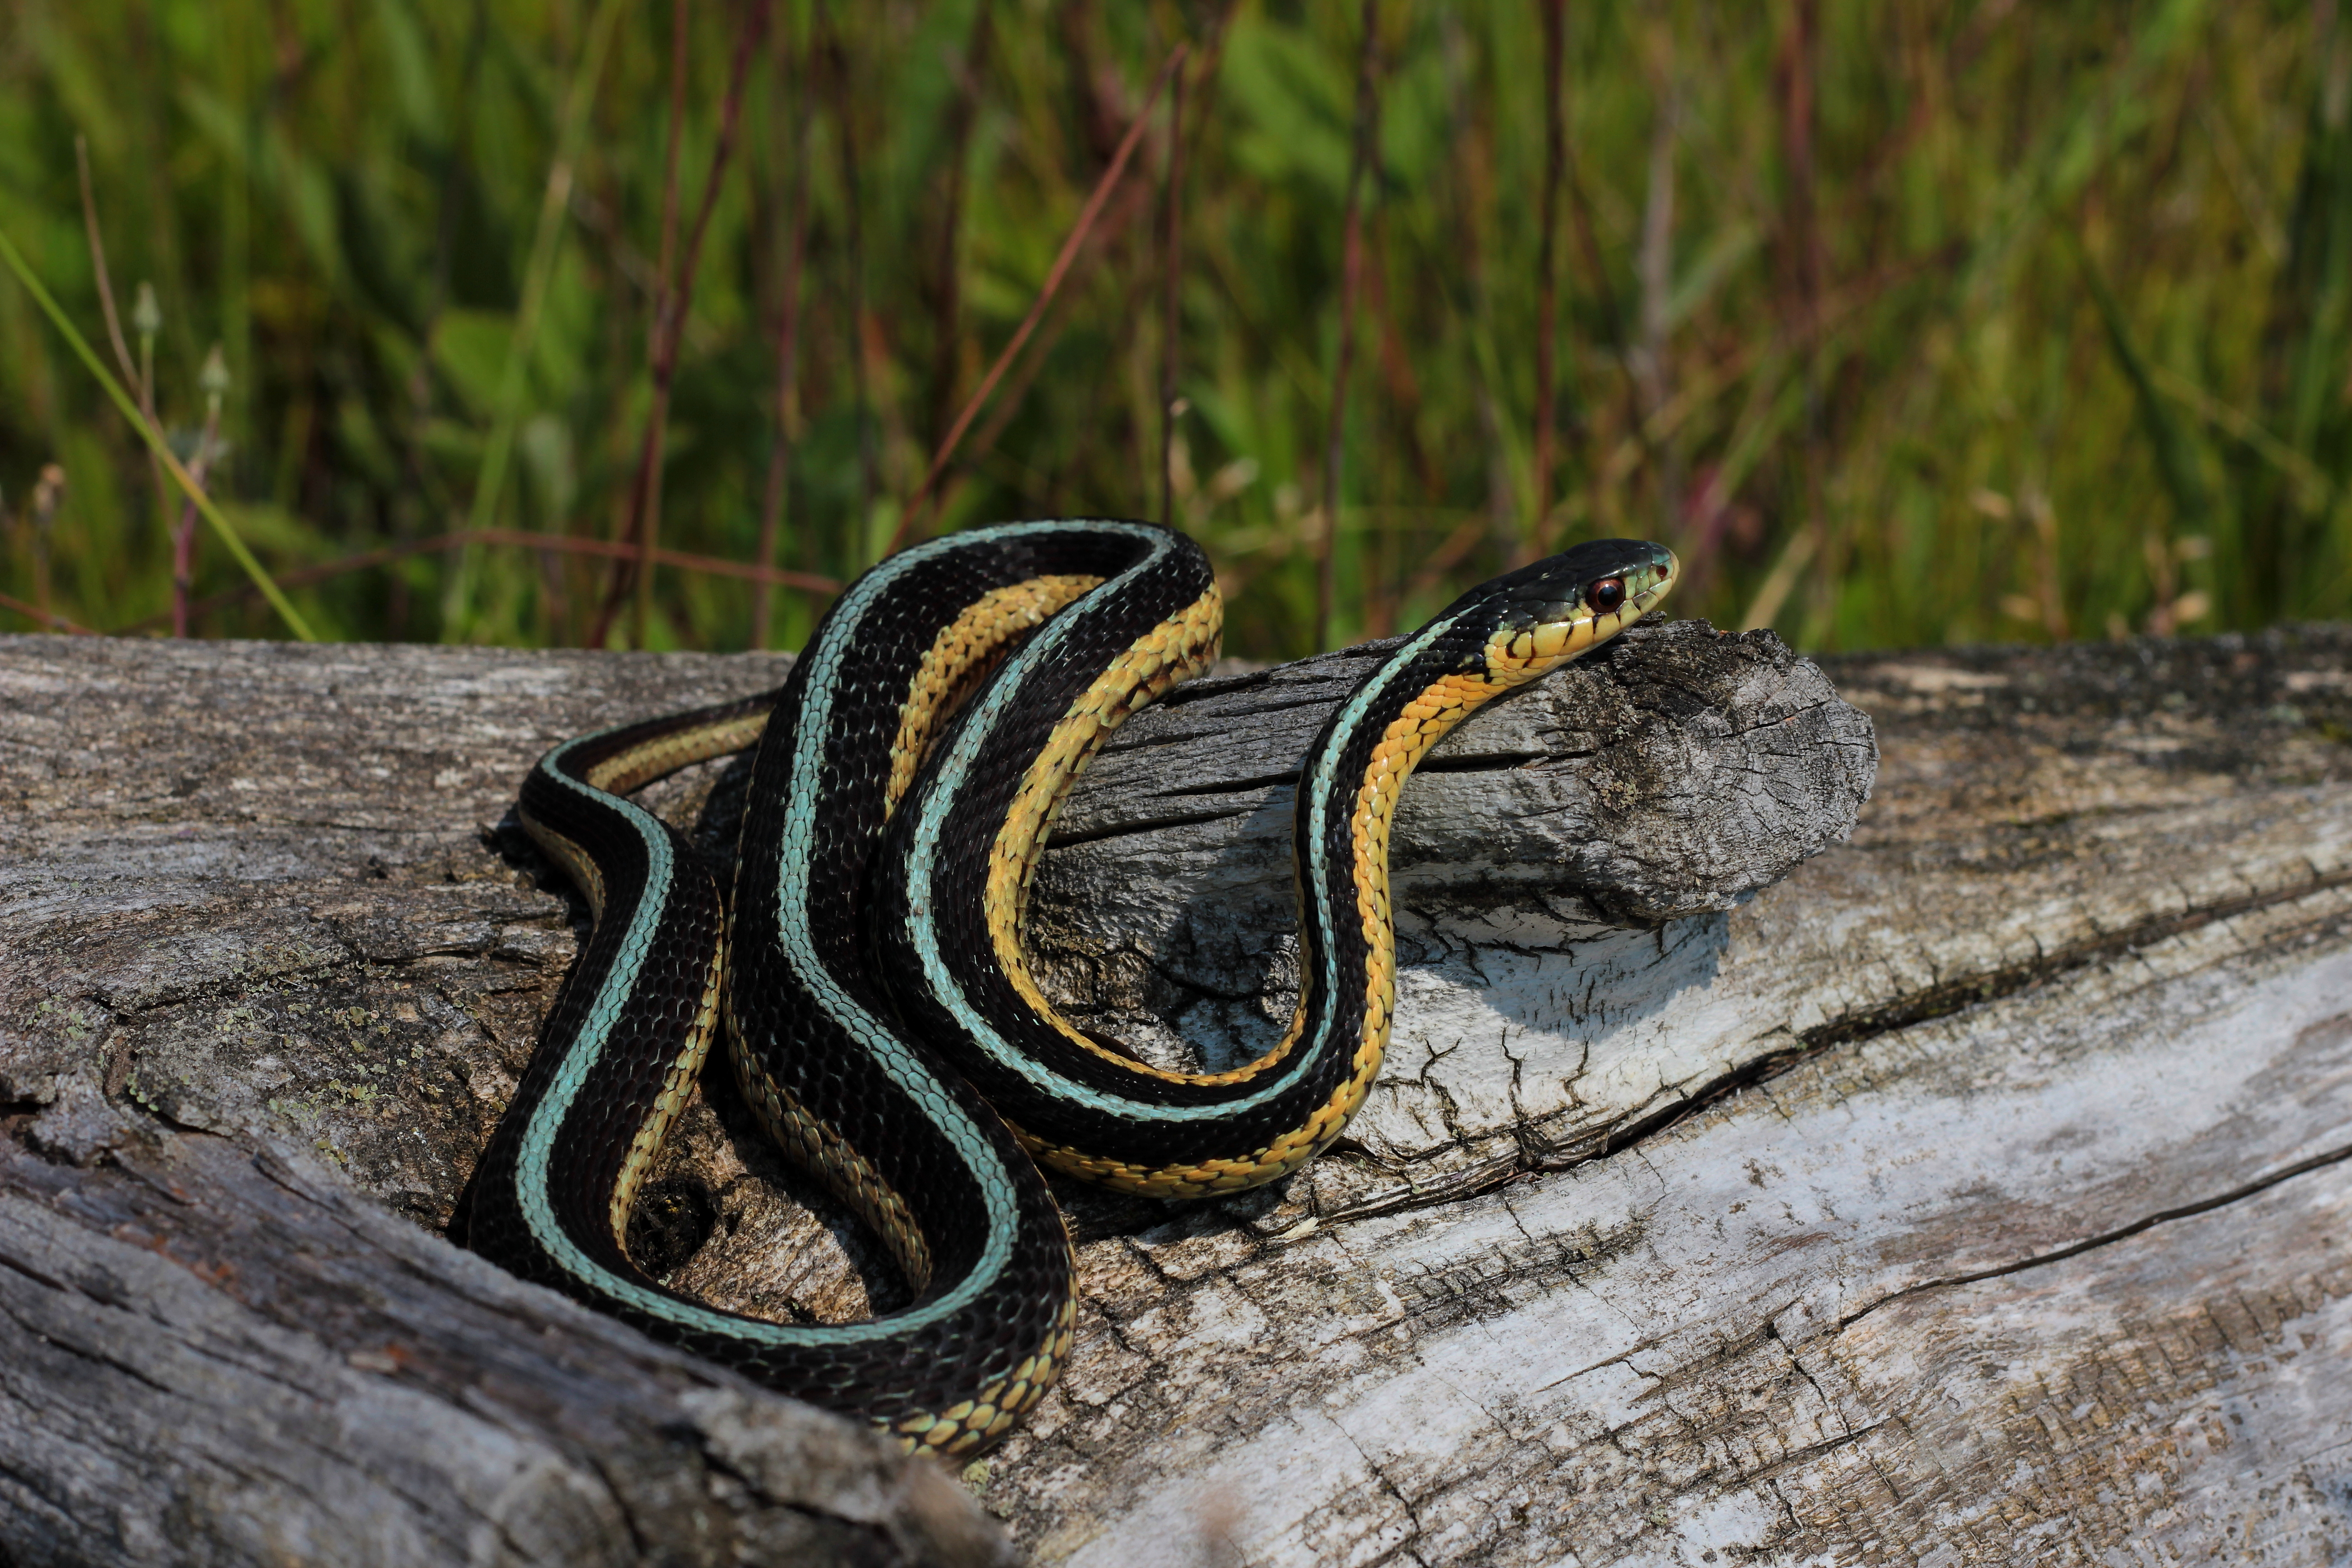 Field Herp Forum View Topic Color And Pattern Variations In